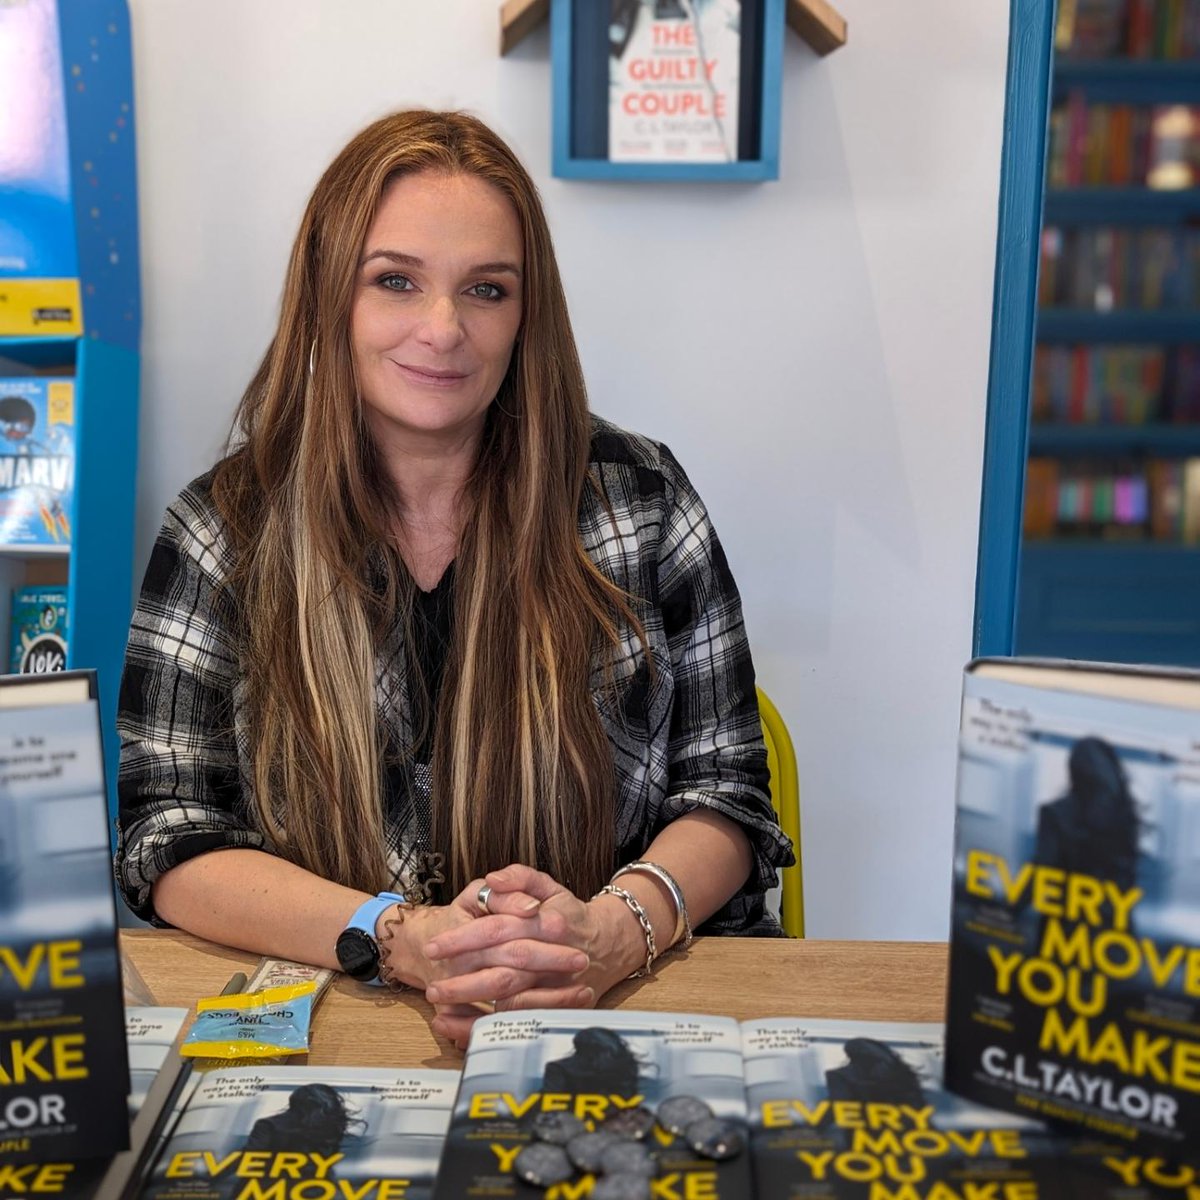 It's publication day for Every Move You Make! Stalking victims try to turn the tables on their stalkers but it doesn't go to plan... 'I absolutely loved it!' @lisajewelluk waterstones.com/book/every-mov… amazon.co.uk/Every-Move-You… Signed bookplate copies: cltaylorauthor.com/novels/signed-…